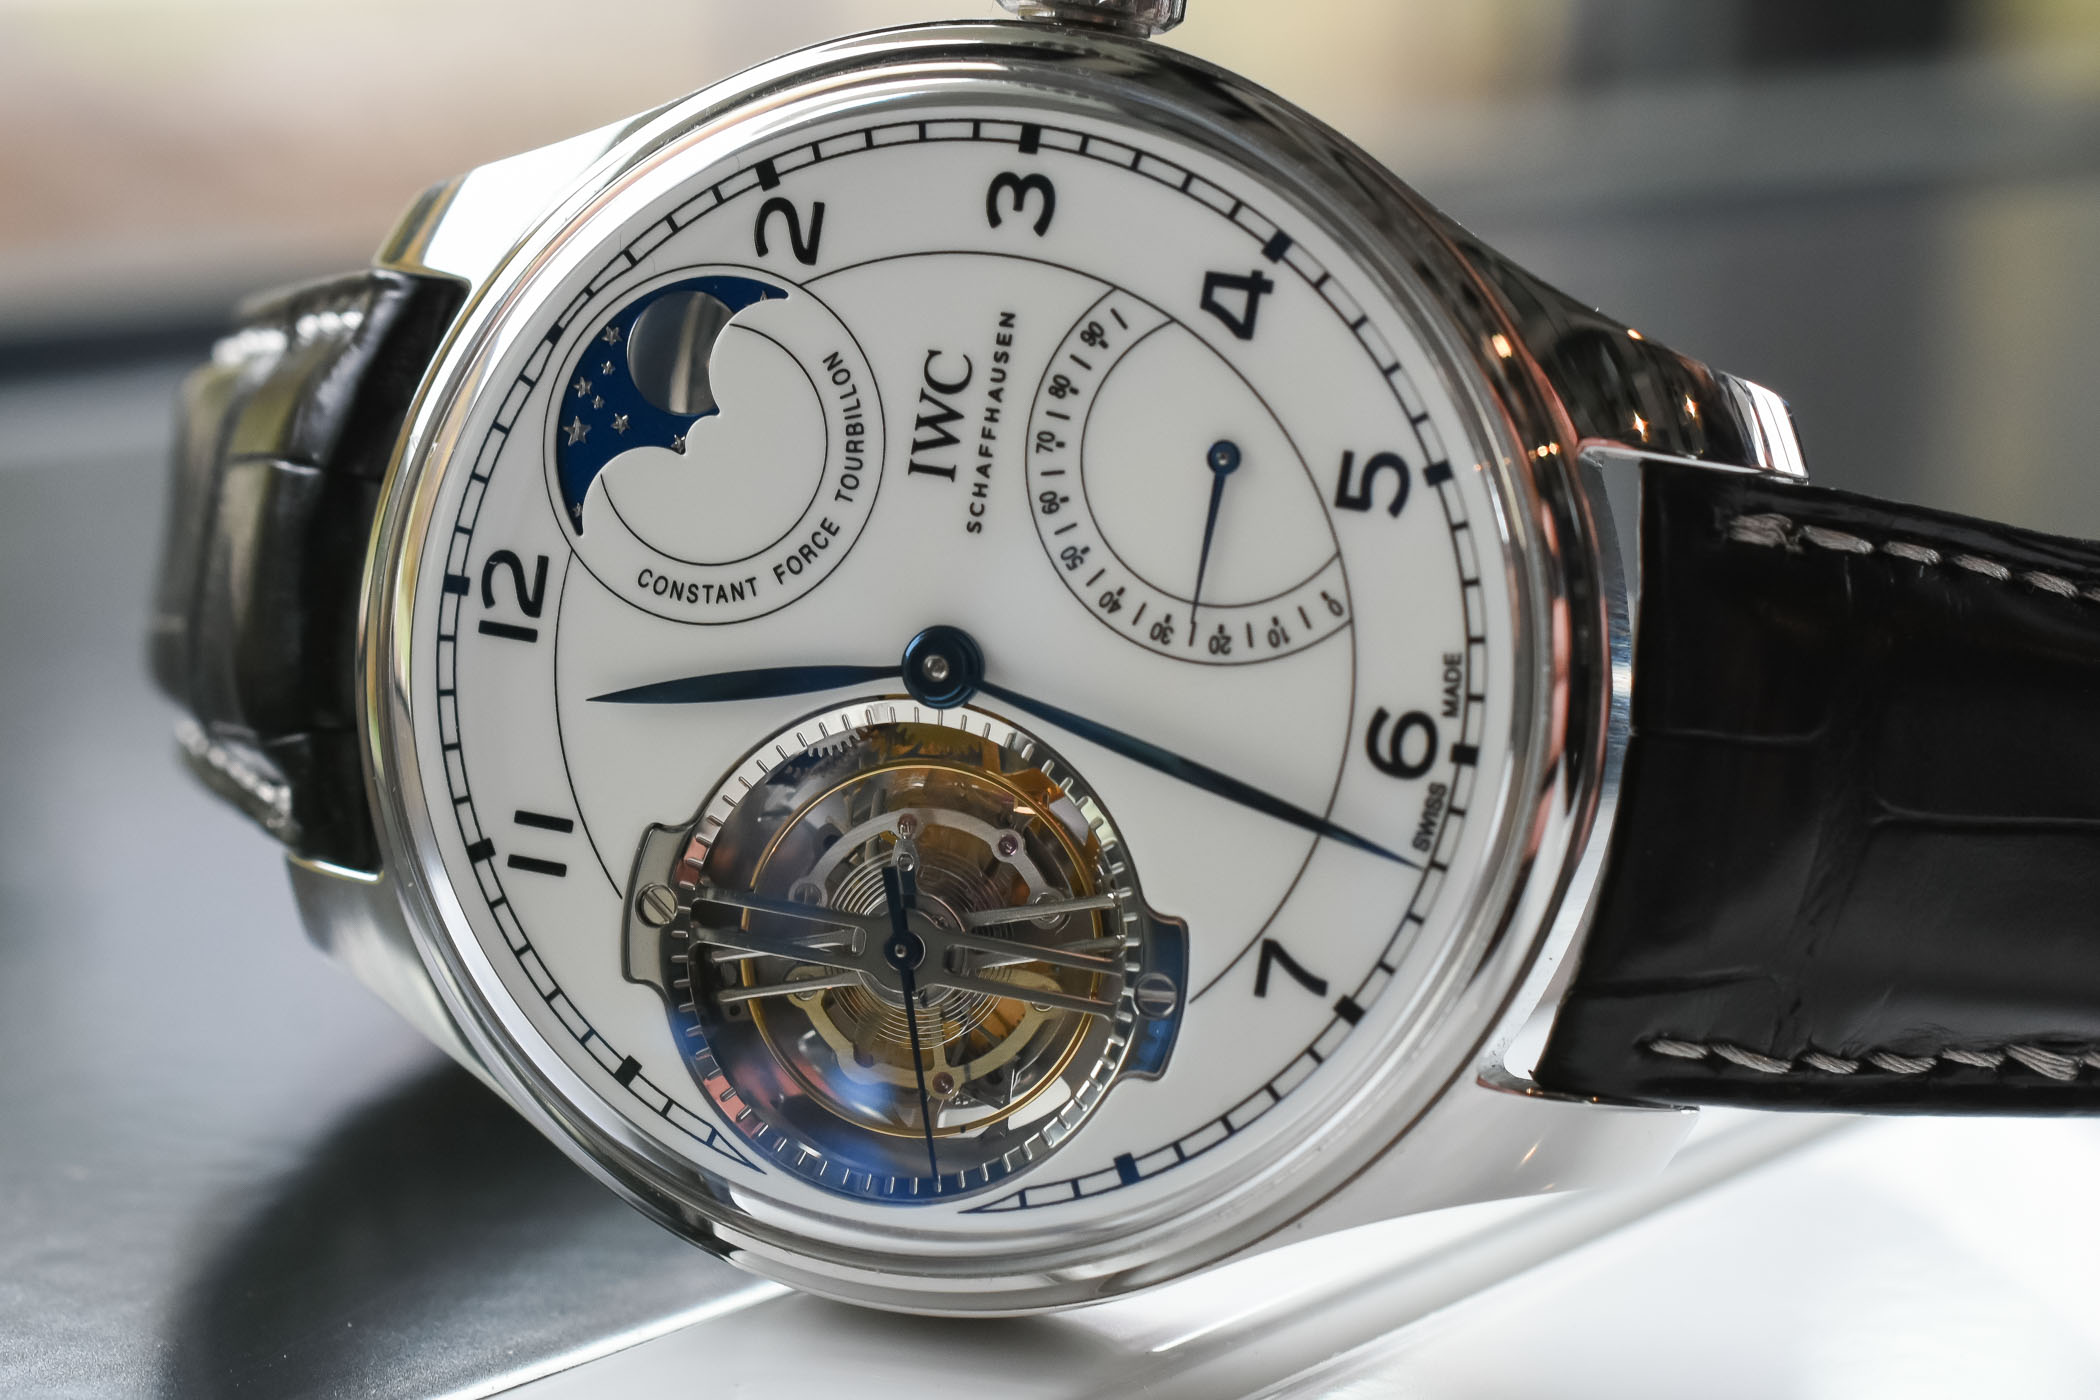 IWC Portugieser Constant Force Tourbillon Edition 150 years Pre-SIHH 2018